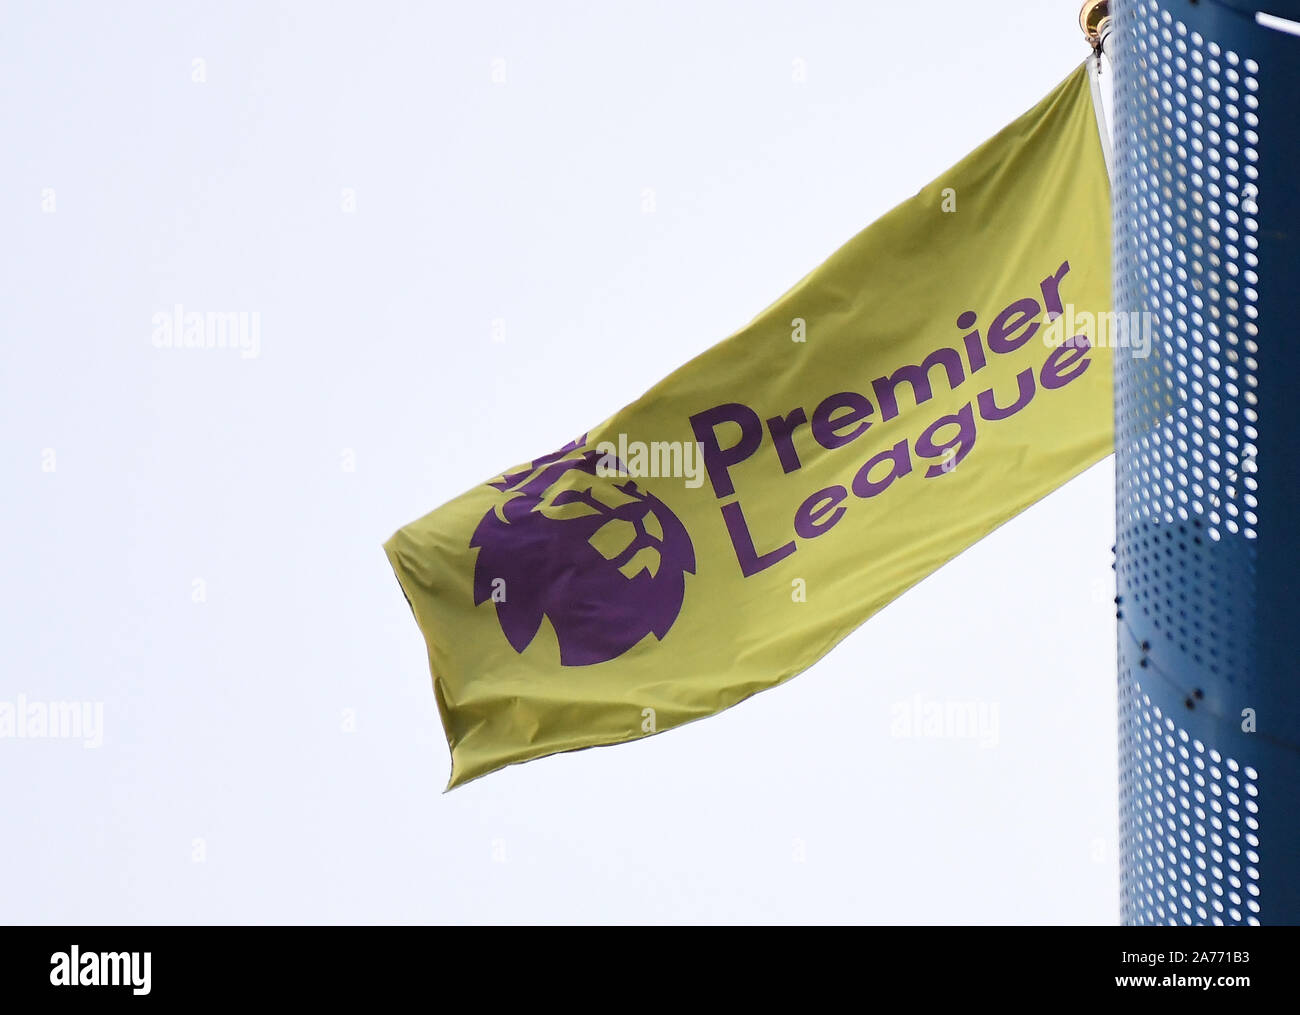 LONDON, ENGLAND - DECEMBER 8, 2018: Premier League branded flag pictured prior to the 2018/19 Premier League game between Chelsea FC and Manchester City at Stamford Bridge. Stock Photo